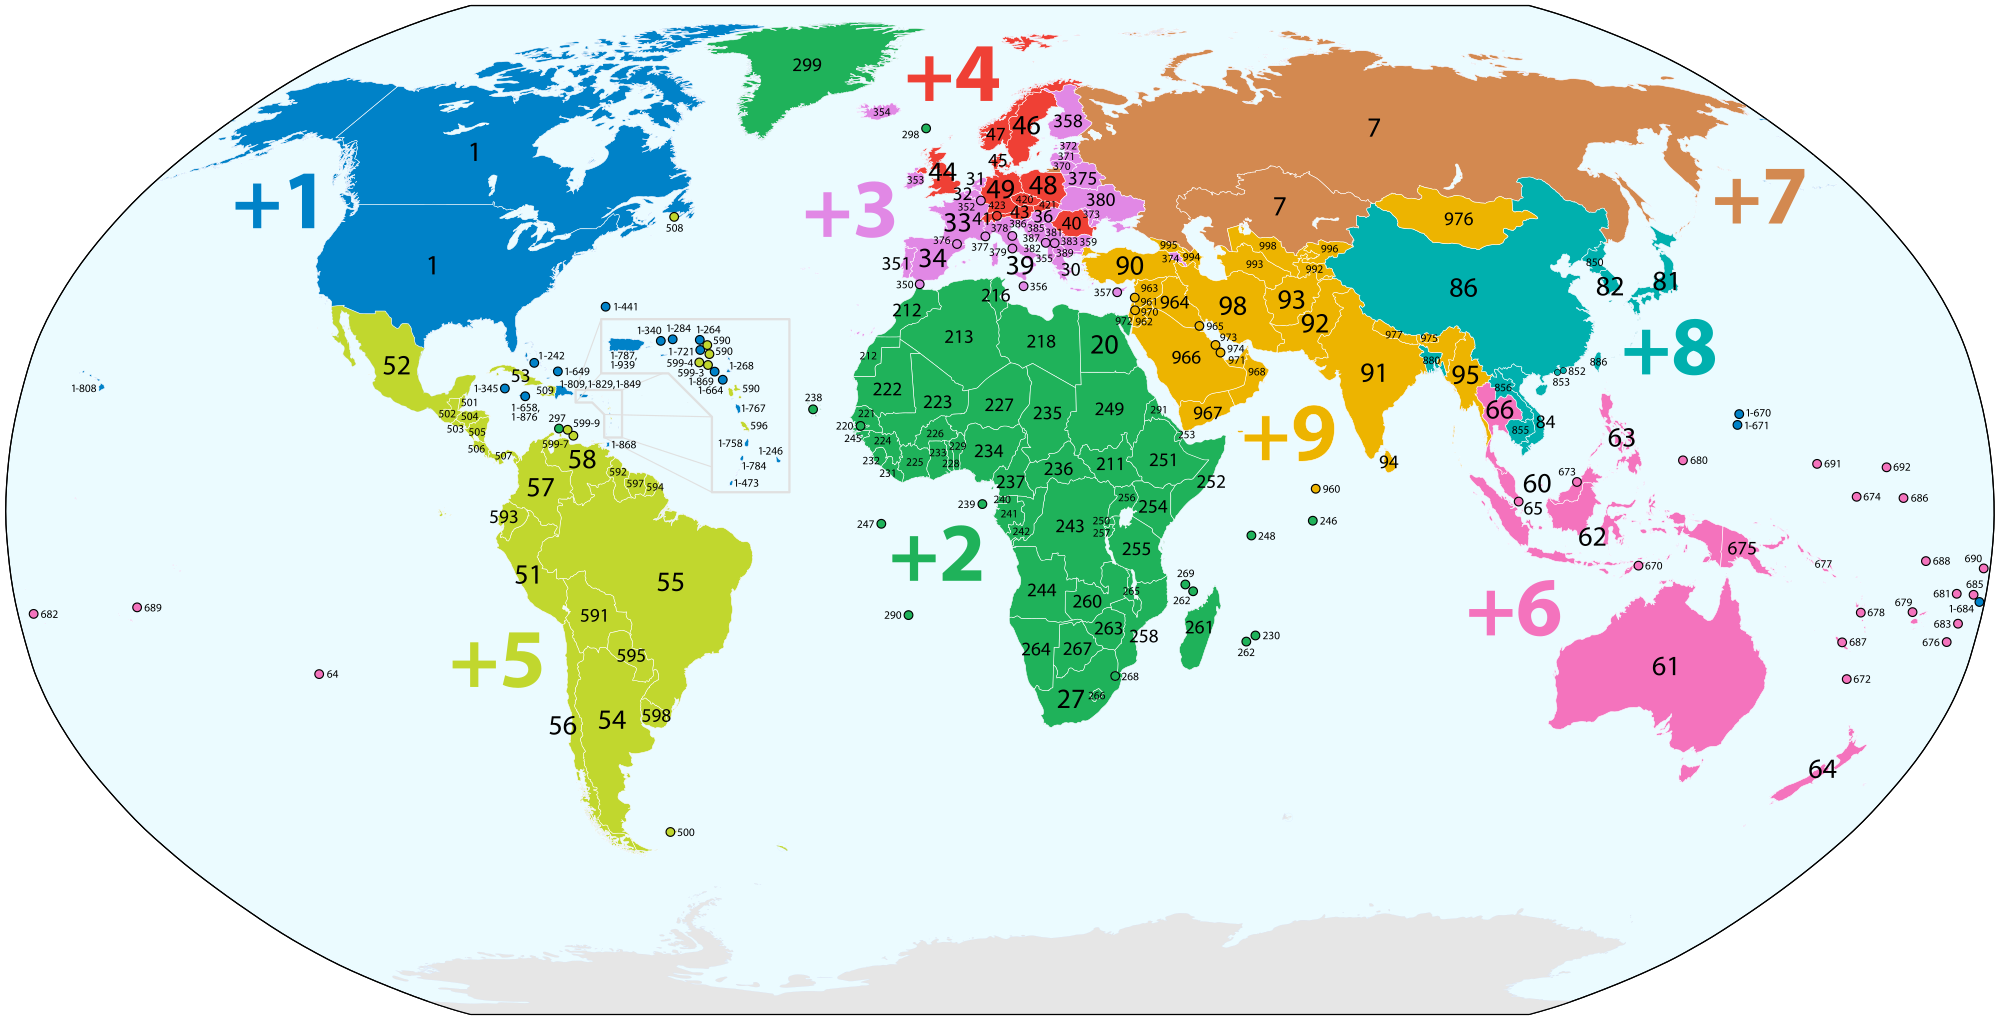 Country_calling_codes_map